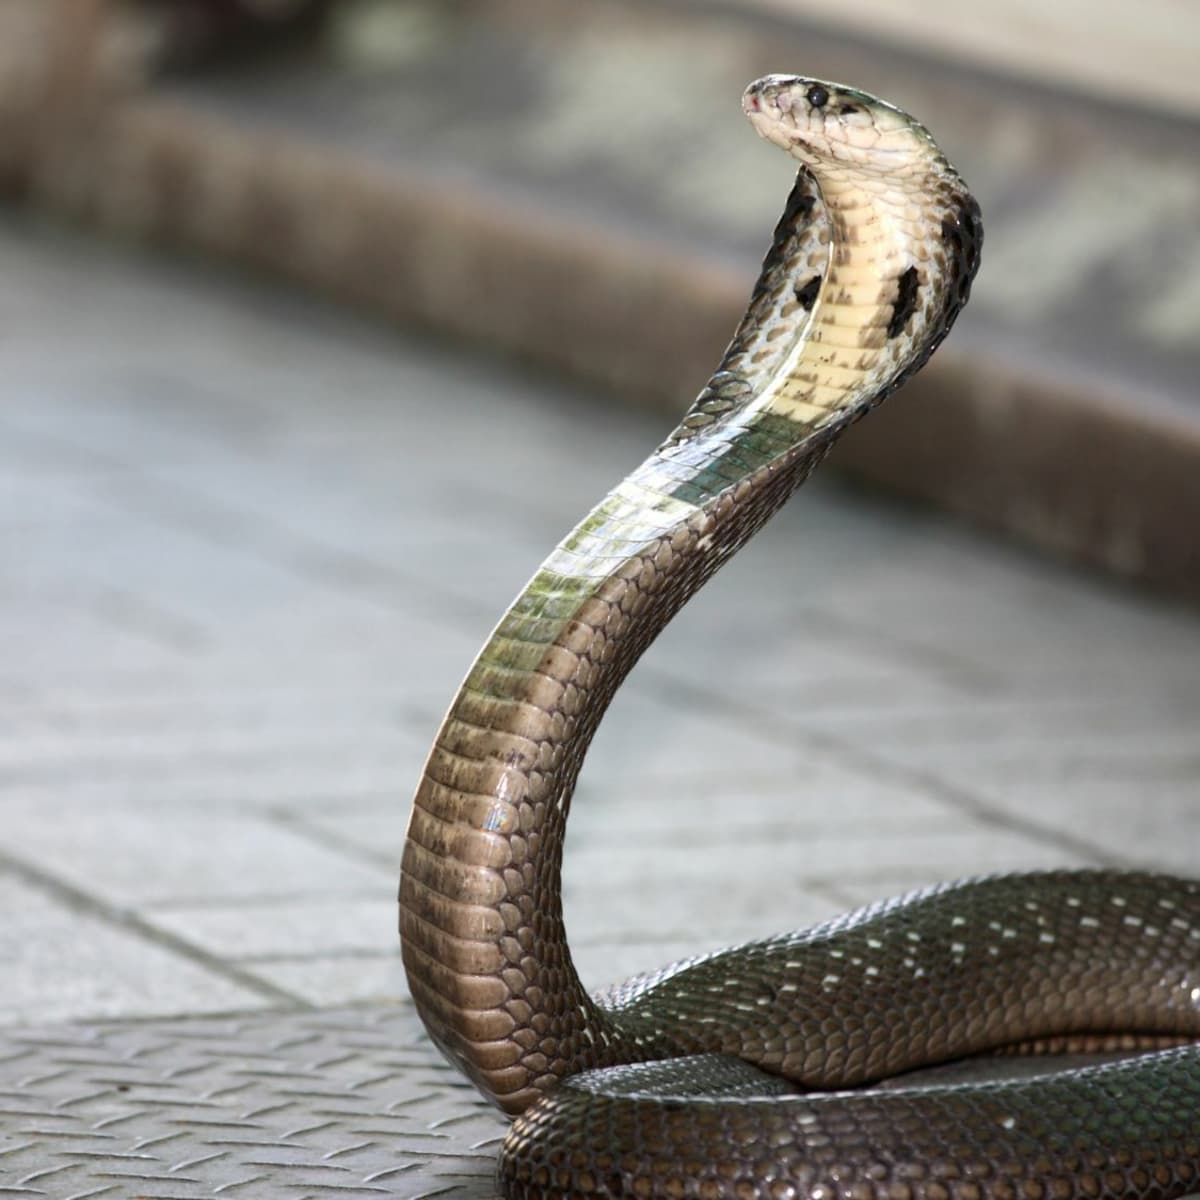 19 Awesome Facts About King Cobra Snakes - Owlcation